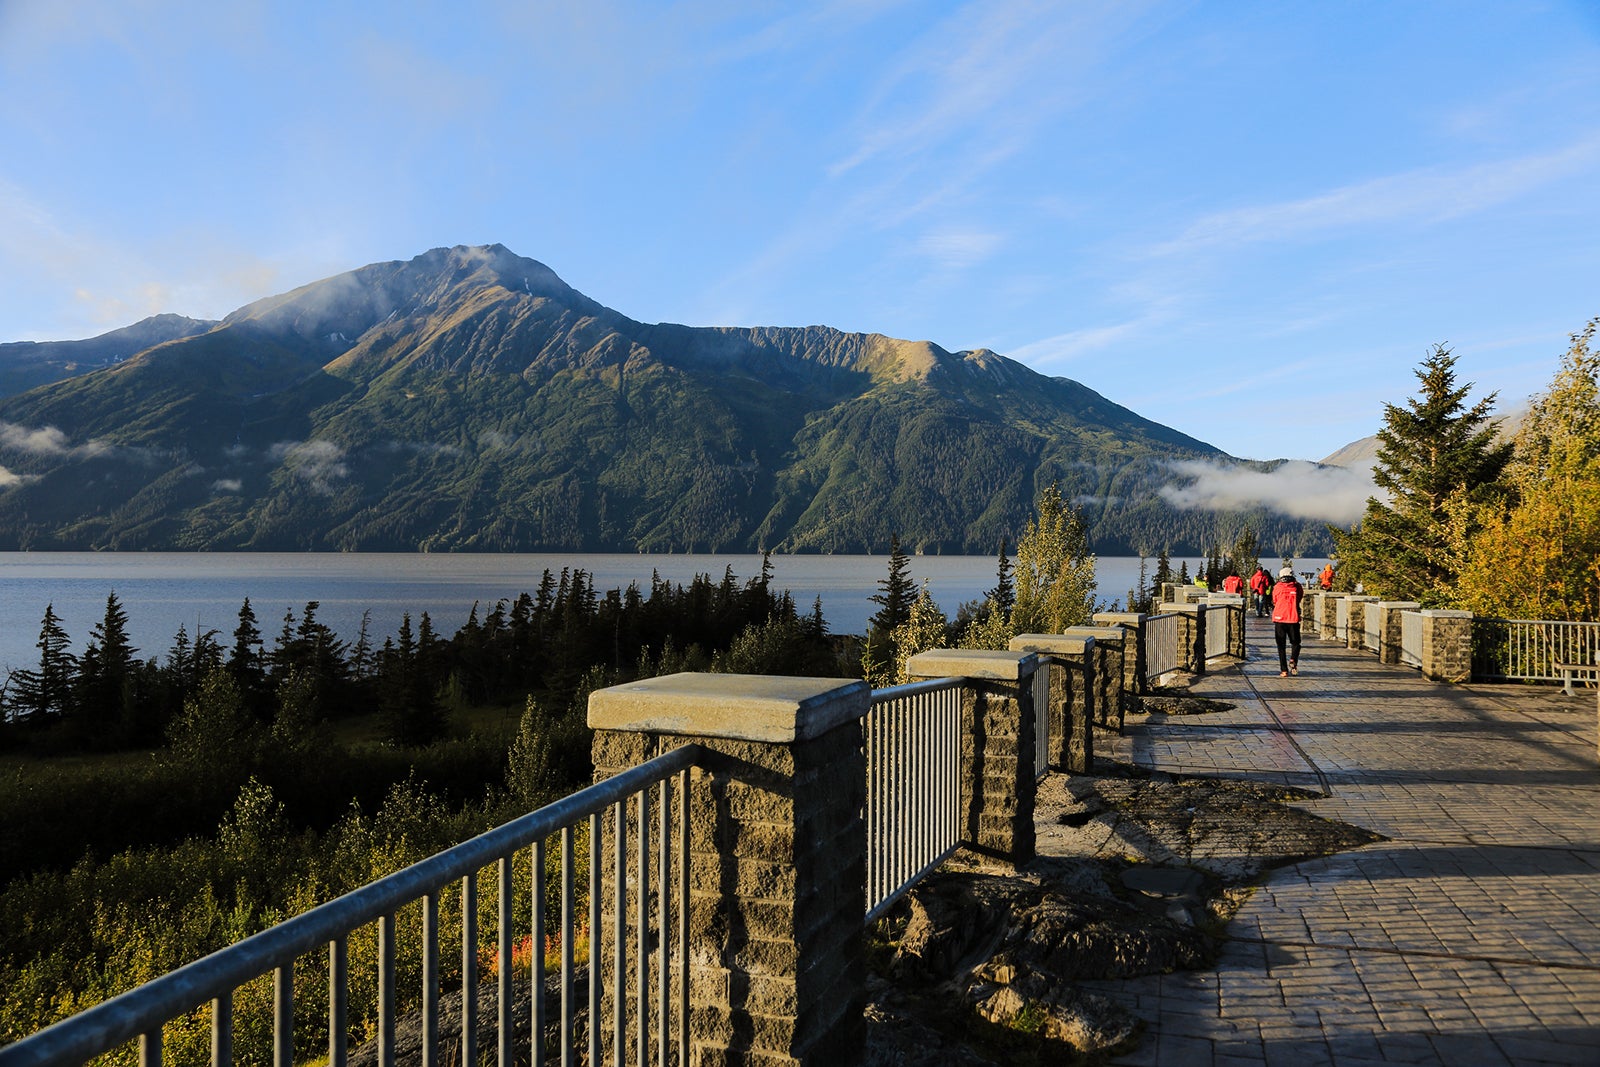 The lookout and scenery of Turnagain Arm in Bird Point. Seward Highway.